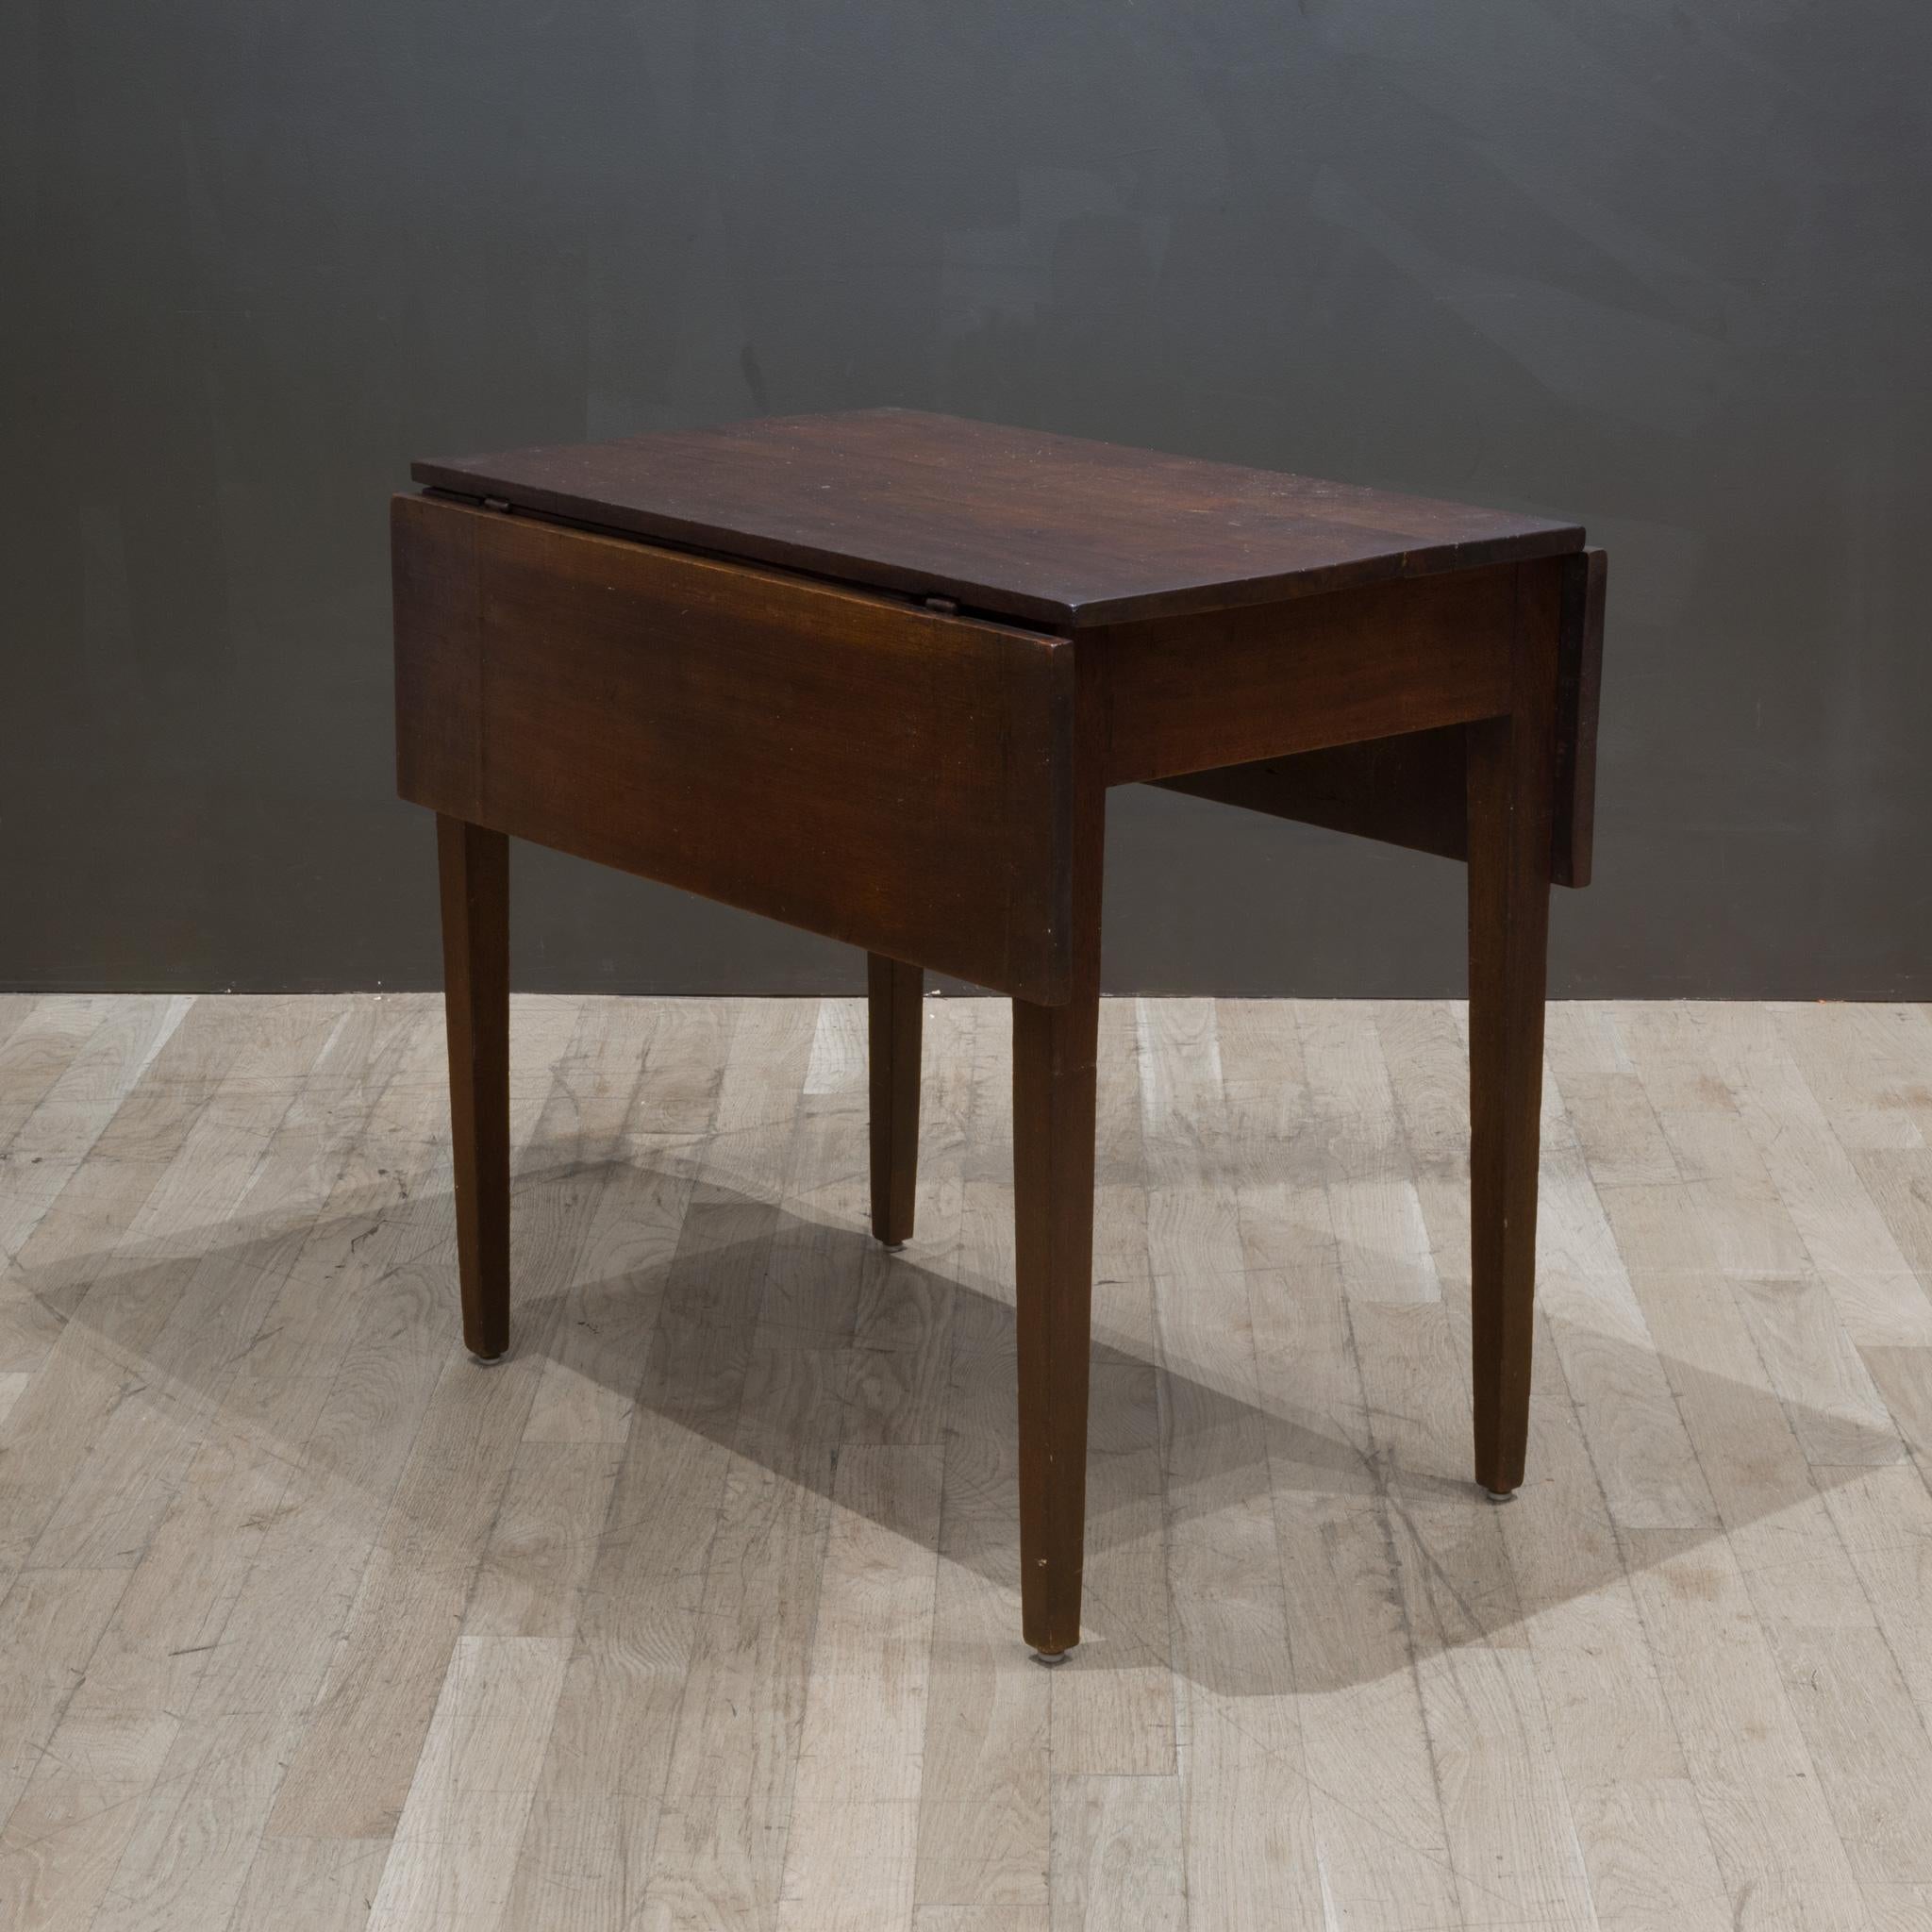 20th Century Rustic Drop Leaf Dining Table/Console c.1940